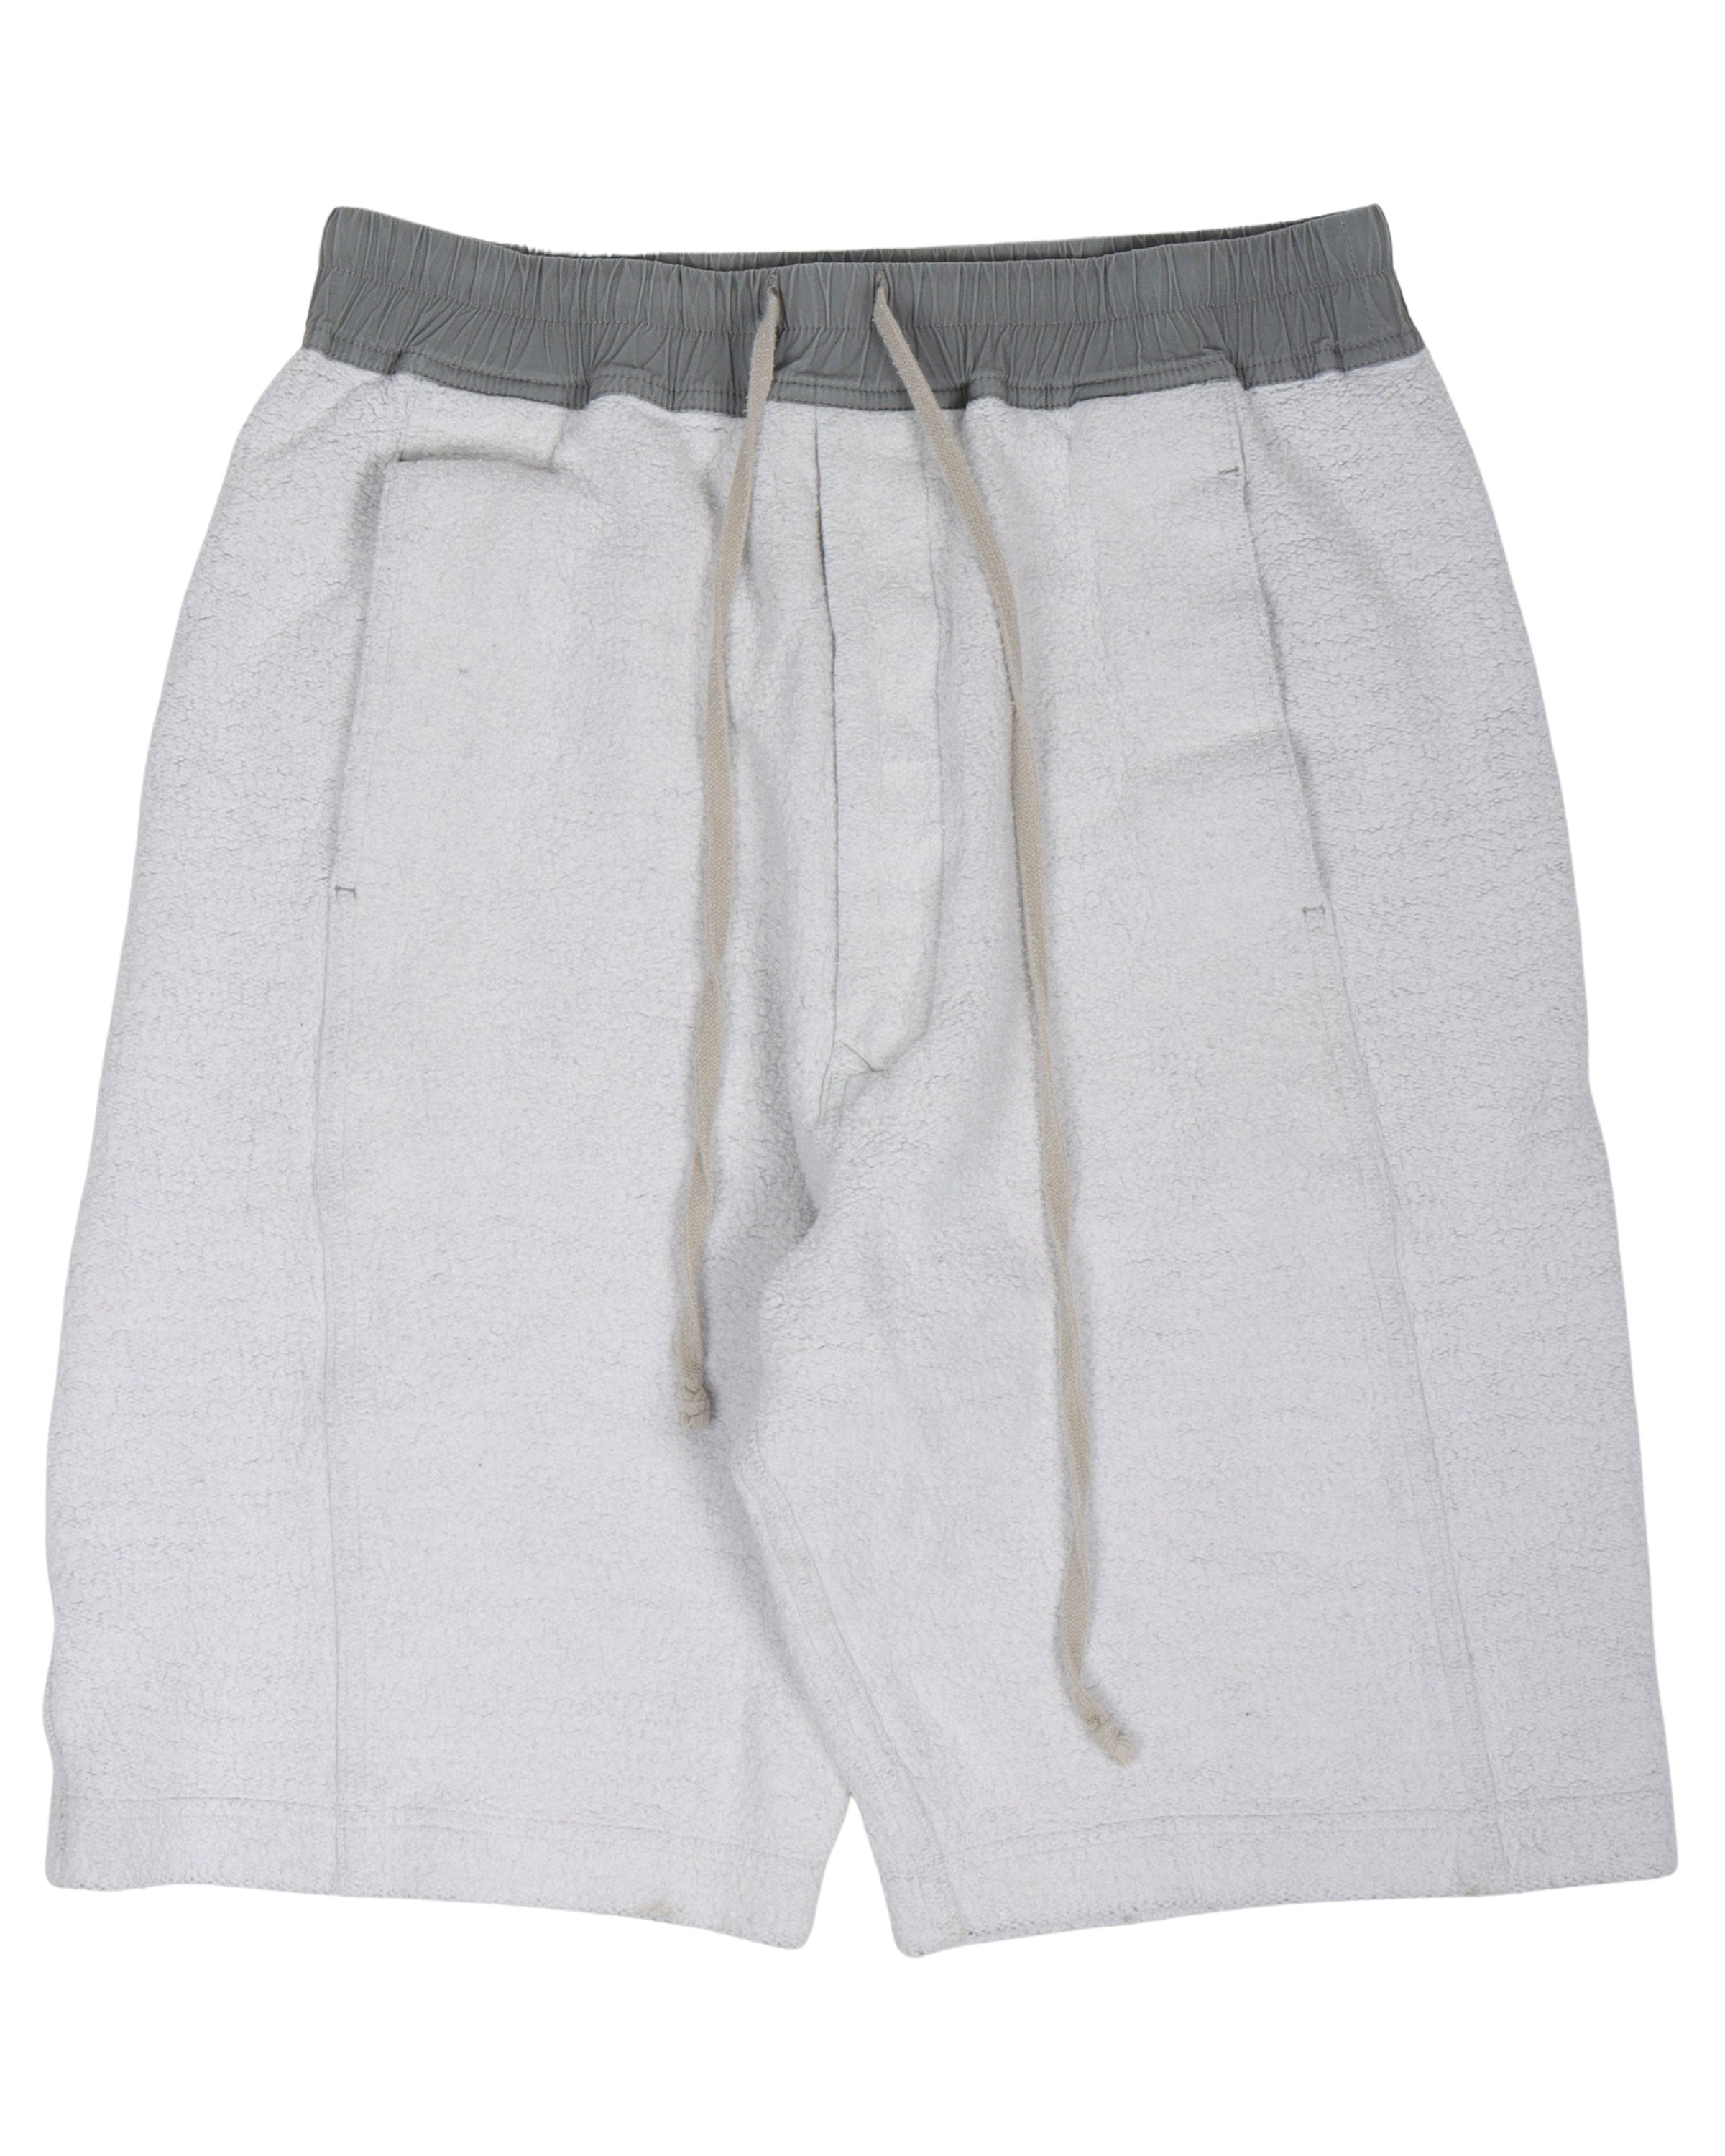 Inside Out Sweat Shorts